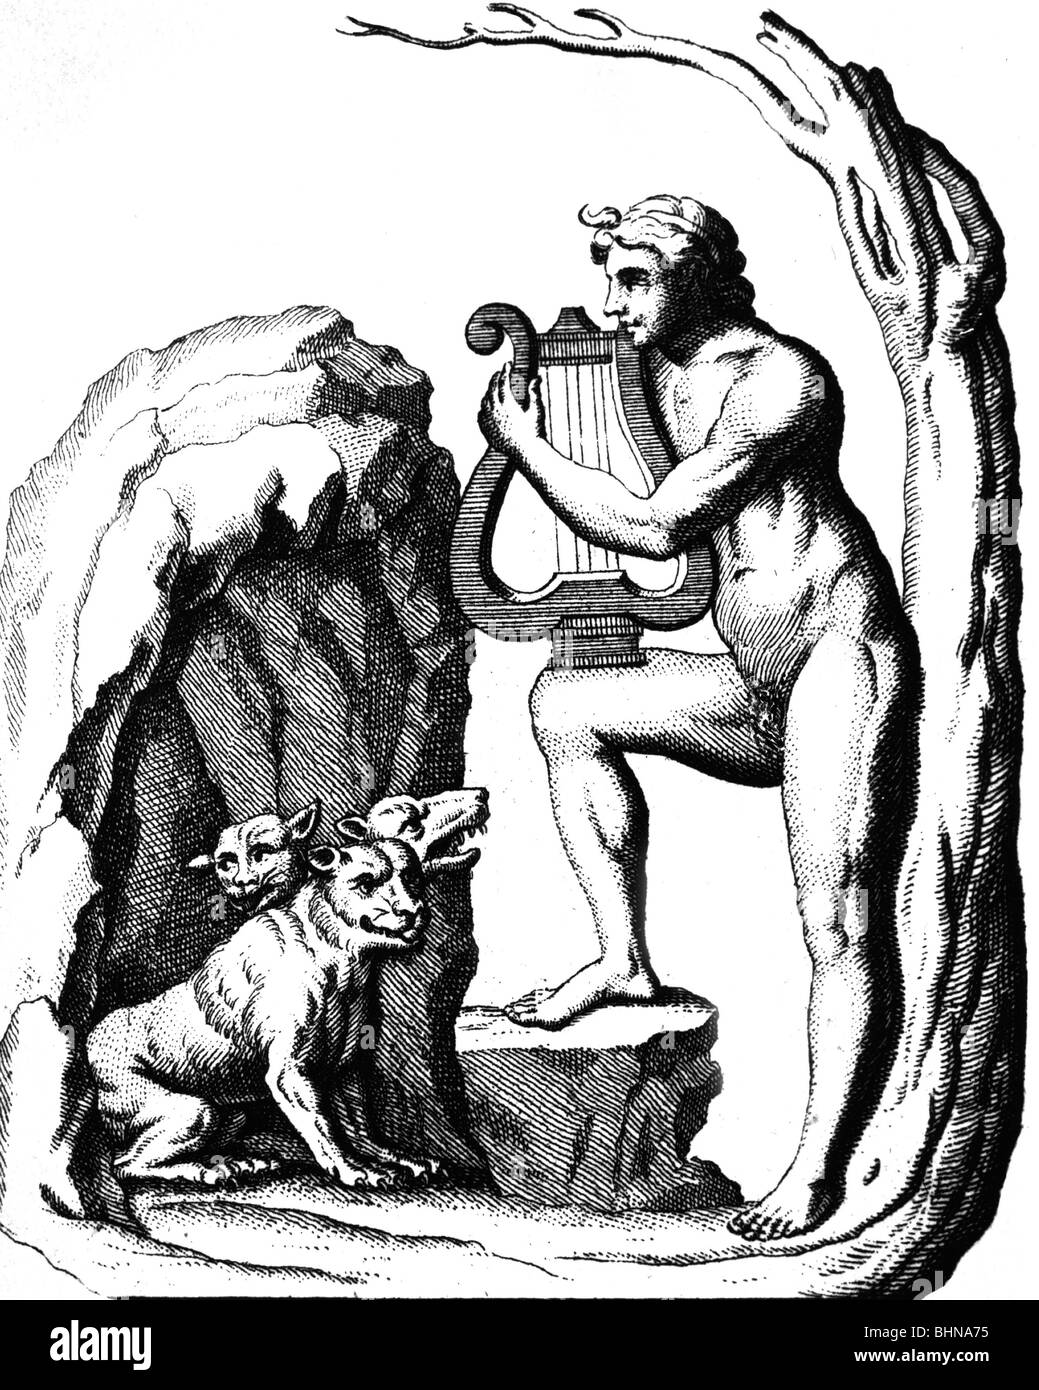 Cerberus (Kerberos), Greek mythological creature, guard of Hades, listening to Orpheus playing music, wood engraving, 19th century, after engraving from 1757, Stock Photo